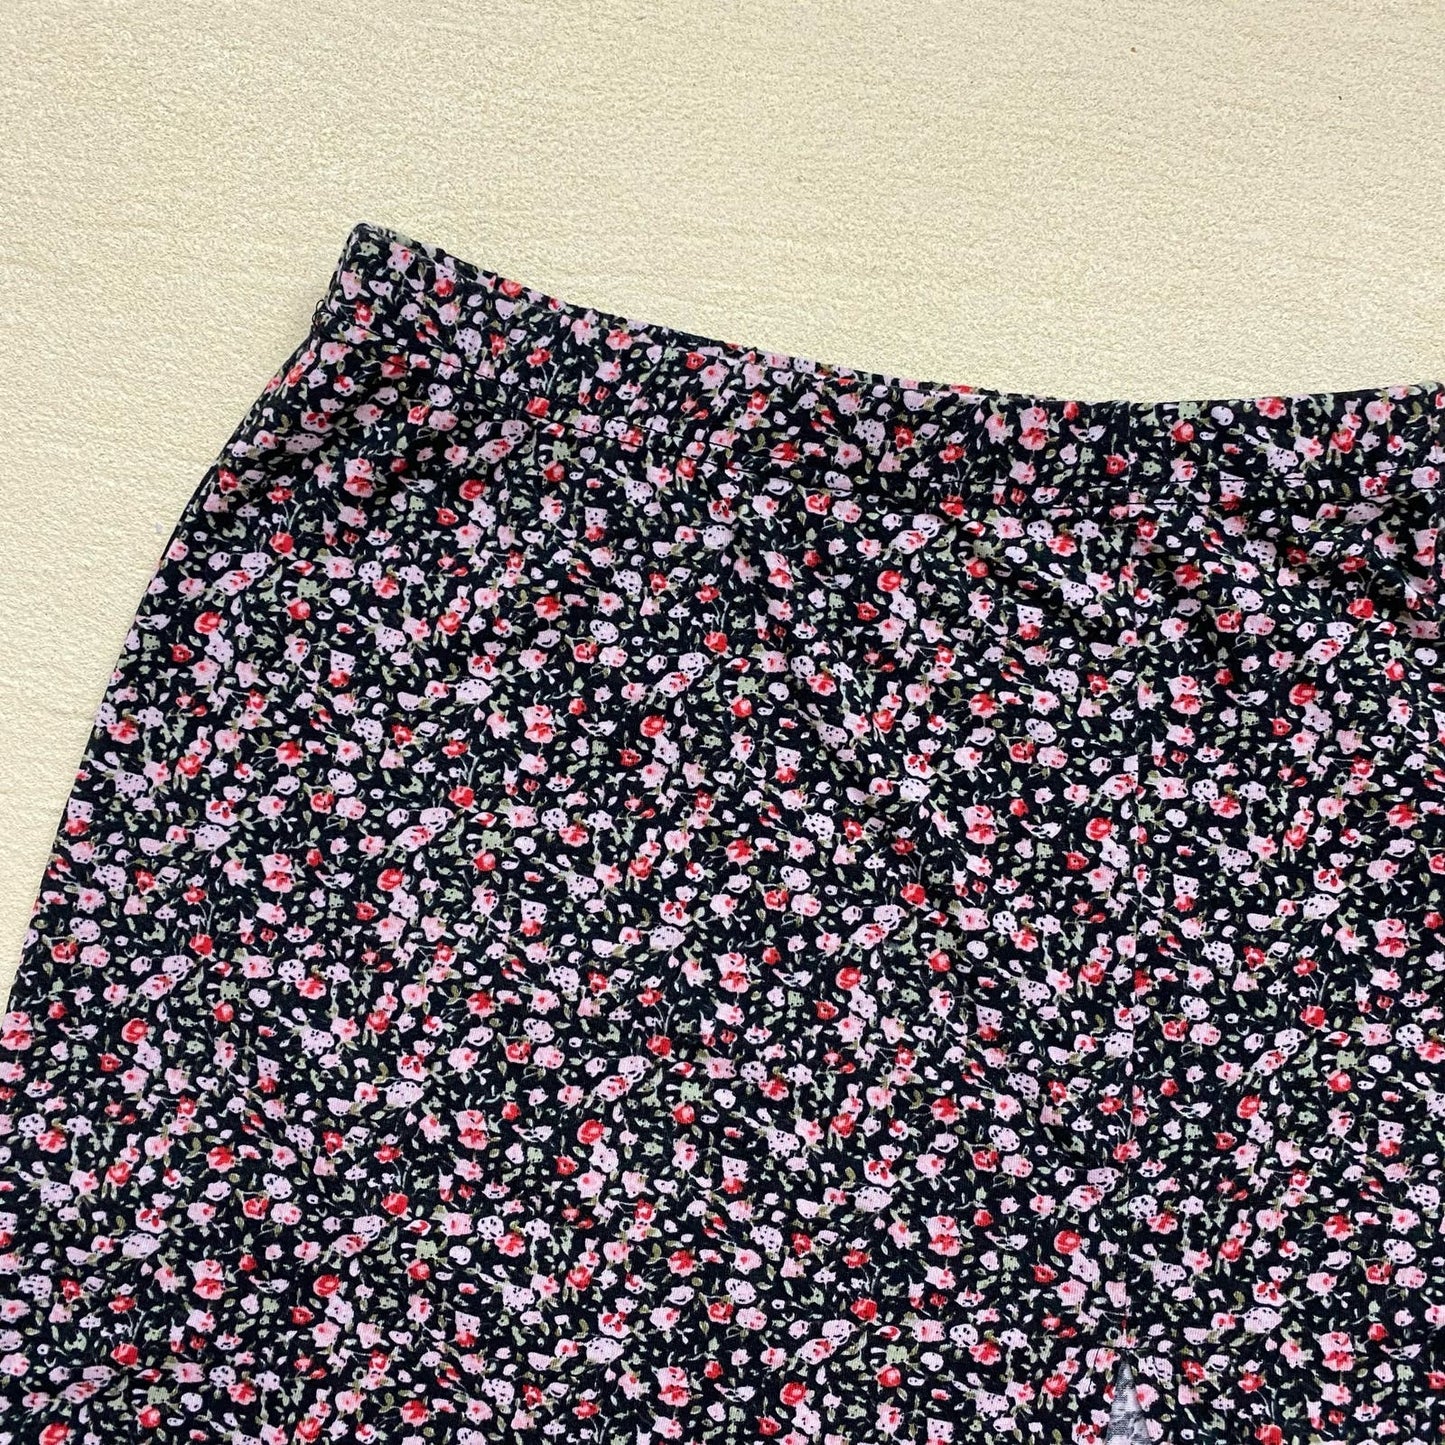 Secondhand Shein Ditsy Floral Soft Stretch Mini Skirt, Size XS